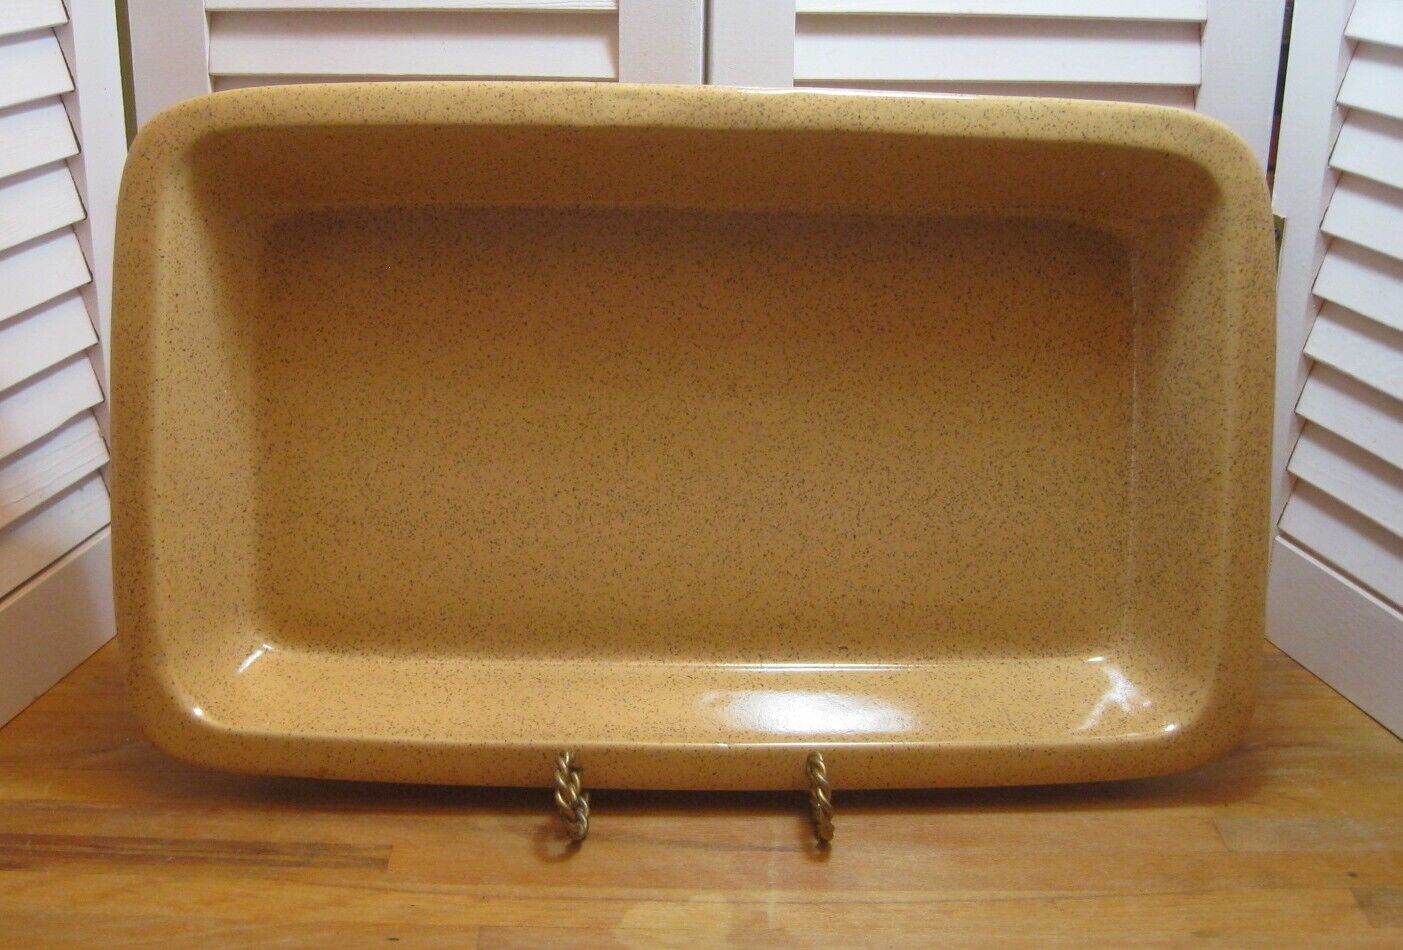 Blue Mountain Pottery 454 Canada Gold Brown Speckled Casserole Dish Rectangular